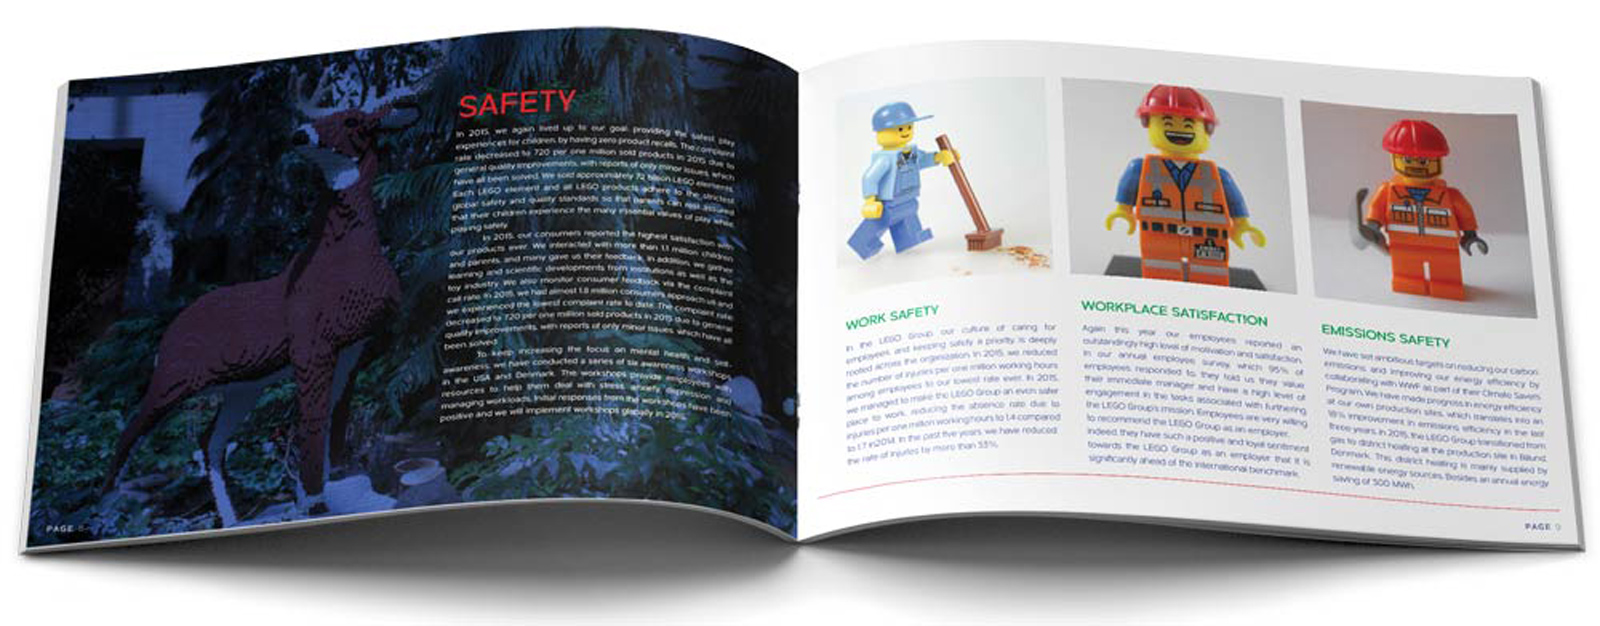 Lego Annual Report Safety Pages